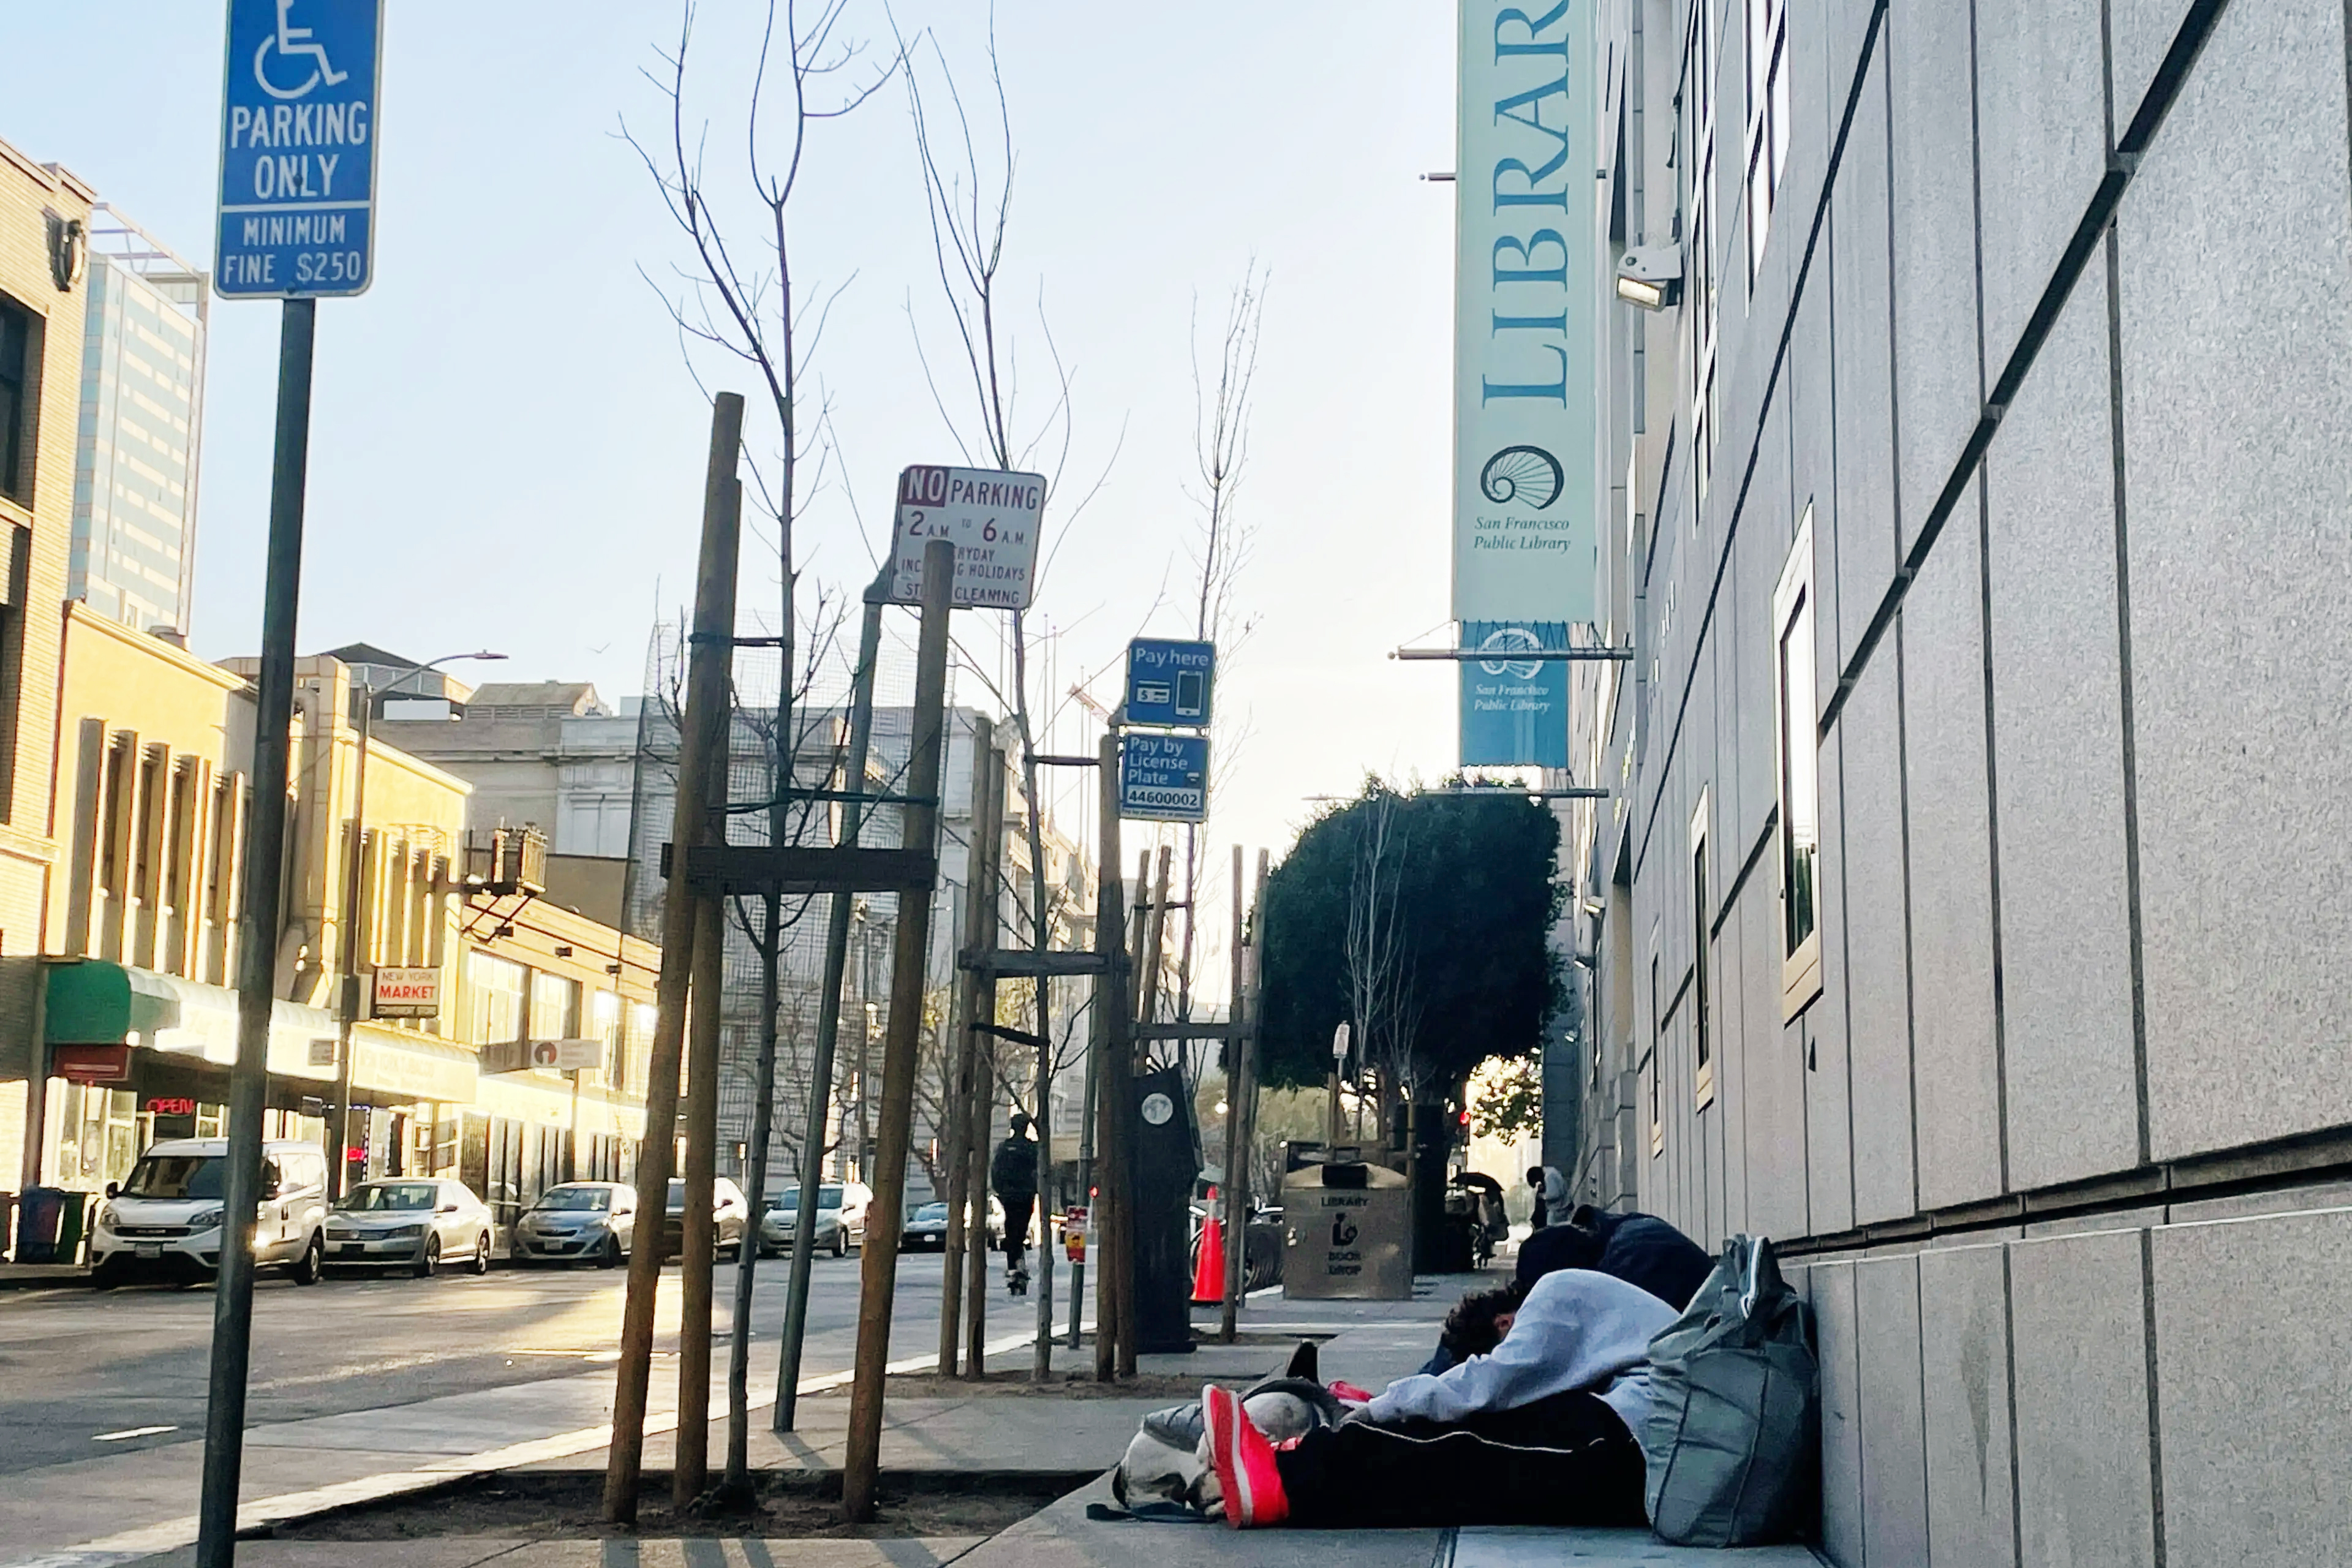 A person lies on a sidewalk next to a building with "LIBRARY" banners, urban setting, daytime.